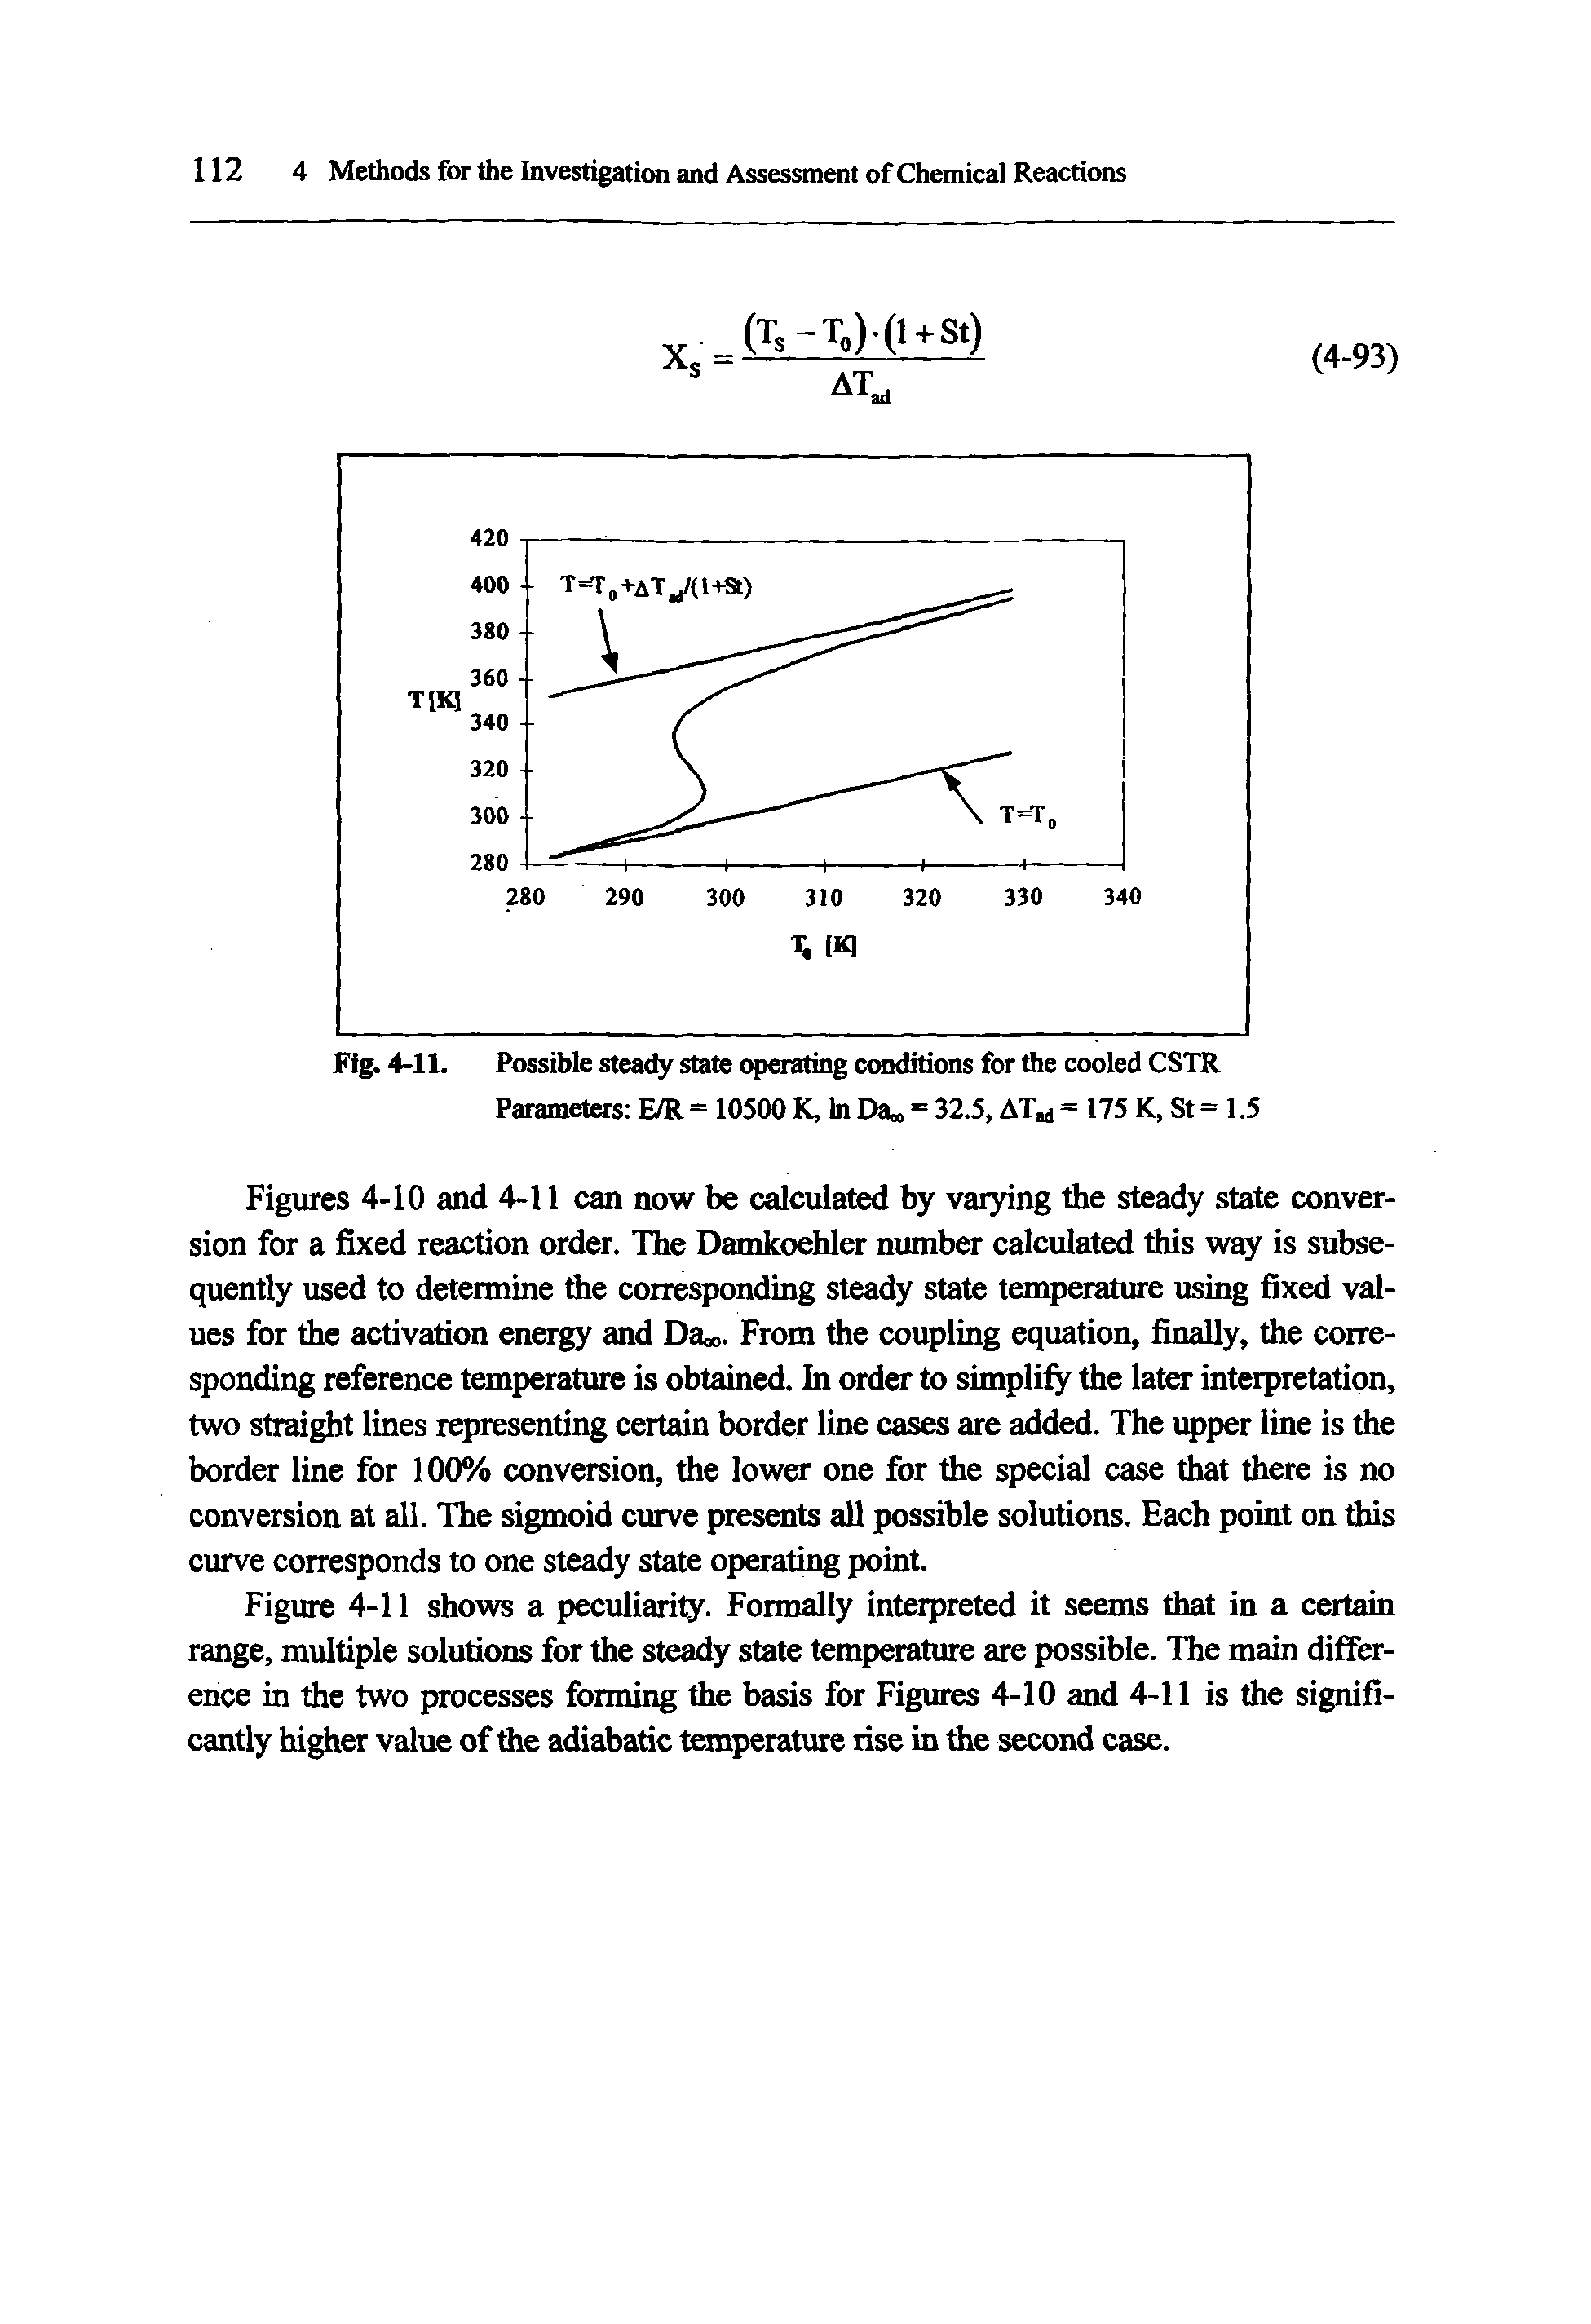 Figures 4-10 and 4-11 can now be calculated by varying the steady state conversion for a fixed reaction order. The Damkoehler number calculated this way is subsequently used to determine flie corresponding steady state temperature using fixed values for the activation energy and Daoo. From the coupling equation, finally, the corresponding reference temperature is obtained. In order to simplify the later interpretation, two straight lines representing certain border line cases are added. The upper line is the border line for 100% conversion, the lower one for the special case that there is no conversion at all. The sigmoid curve presents all possible solutions. Each point on this curve corresponds to one steady state operating point.